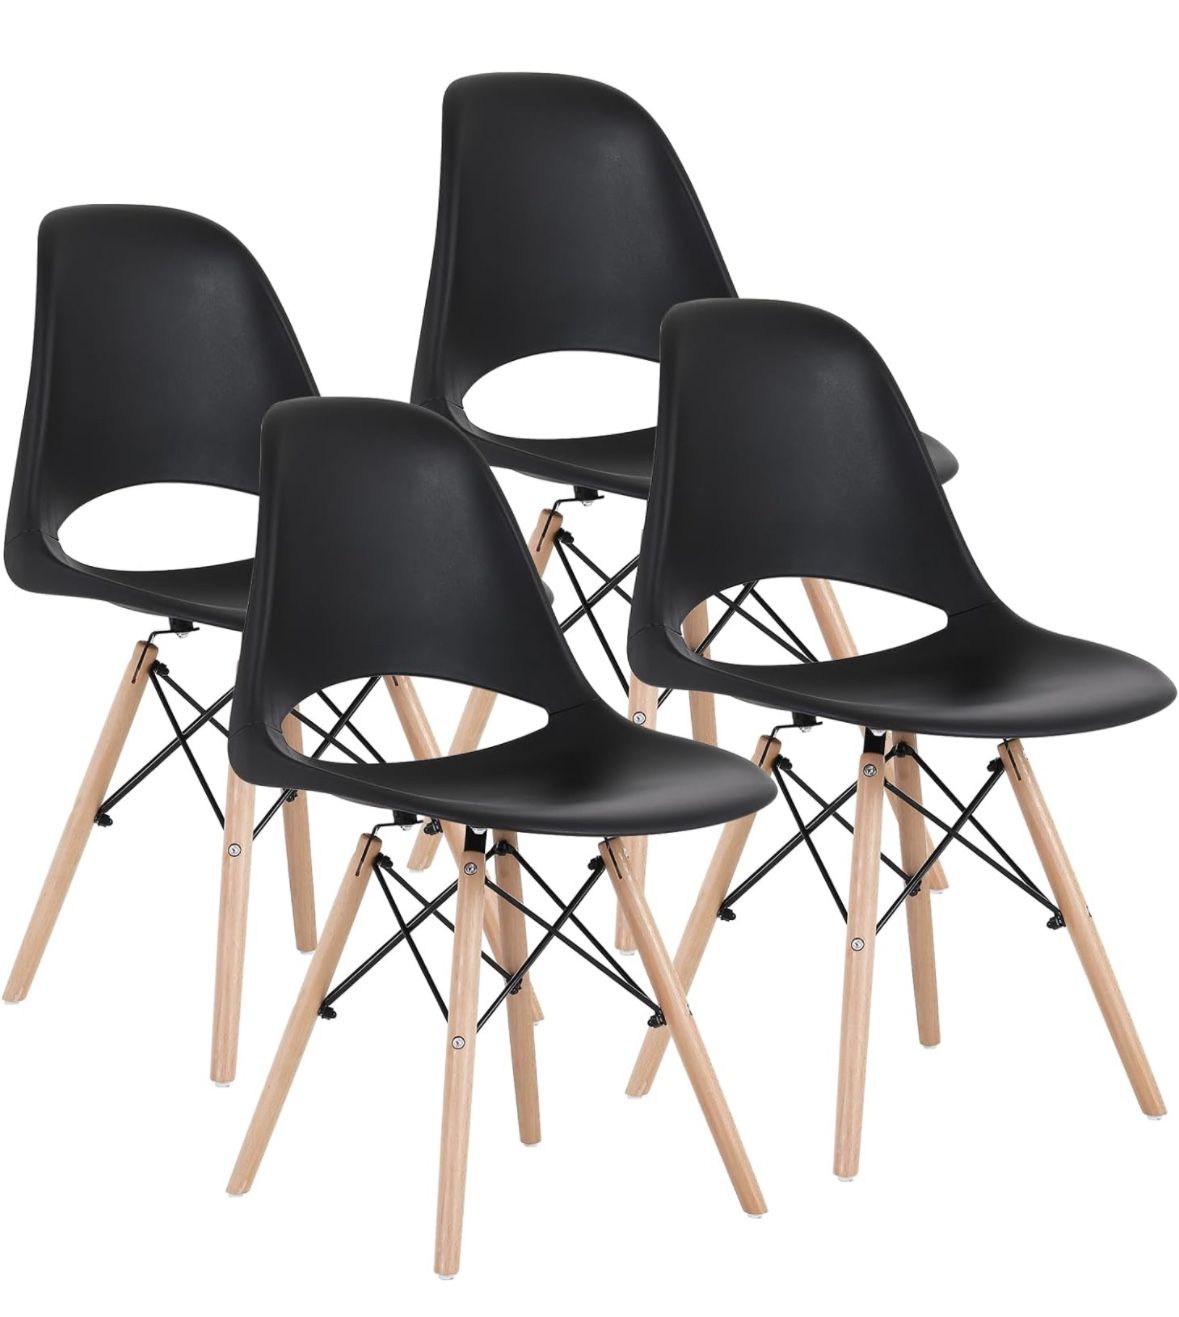 Dining Chairs Set of 4 Plastic Modern Dining Chairs with Wooden Legs, Mid-Century Side Chairs for Dining Room and Office, Outdoor Lounge Chairs Black.